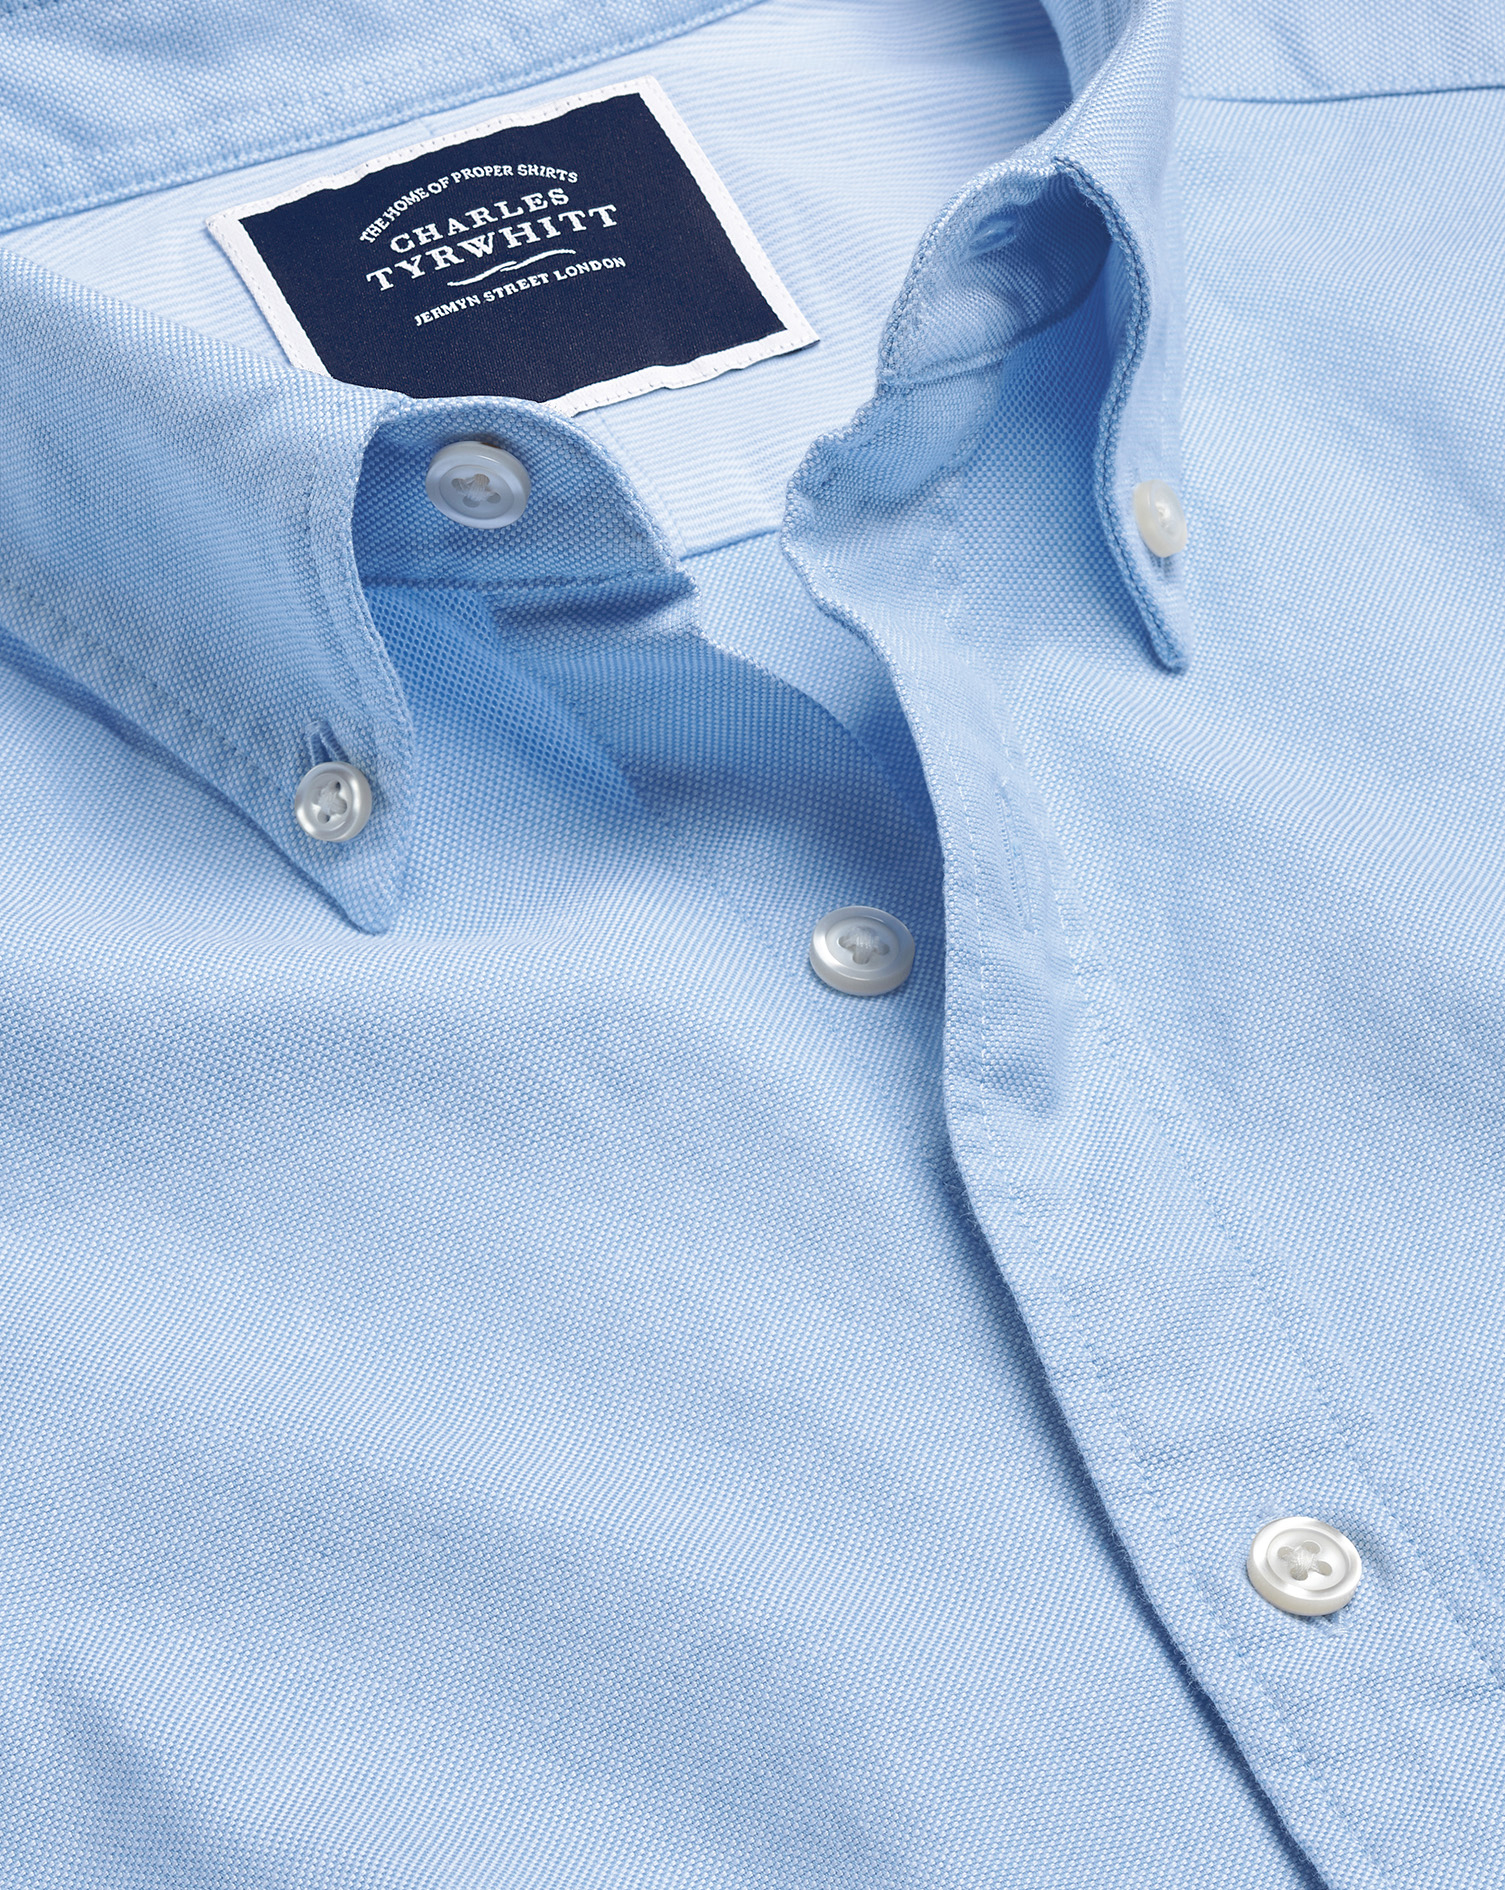 Button-Down Collar Washed Oxford Cotton Casual Shirt With Pocket - Sky Single Cuff Size Small
